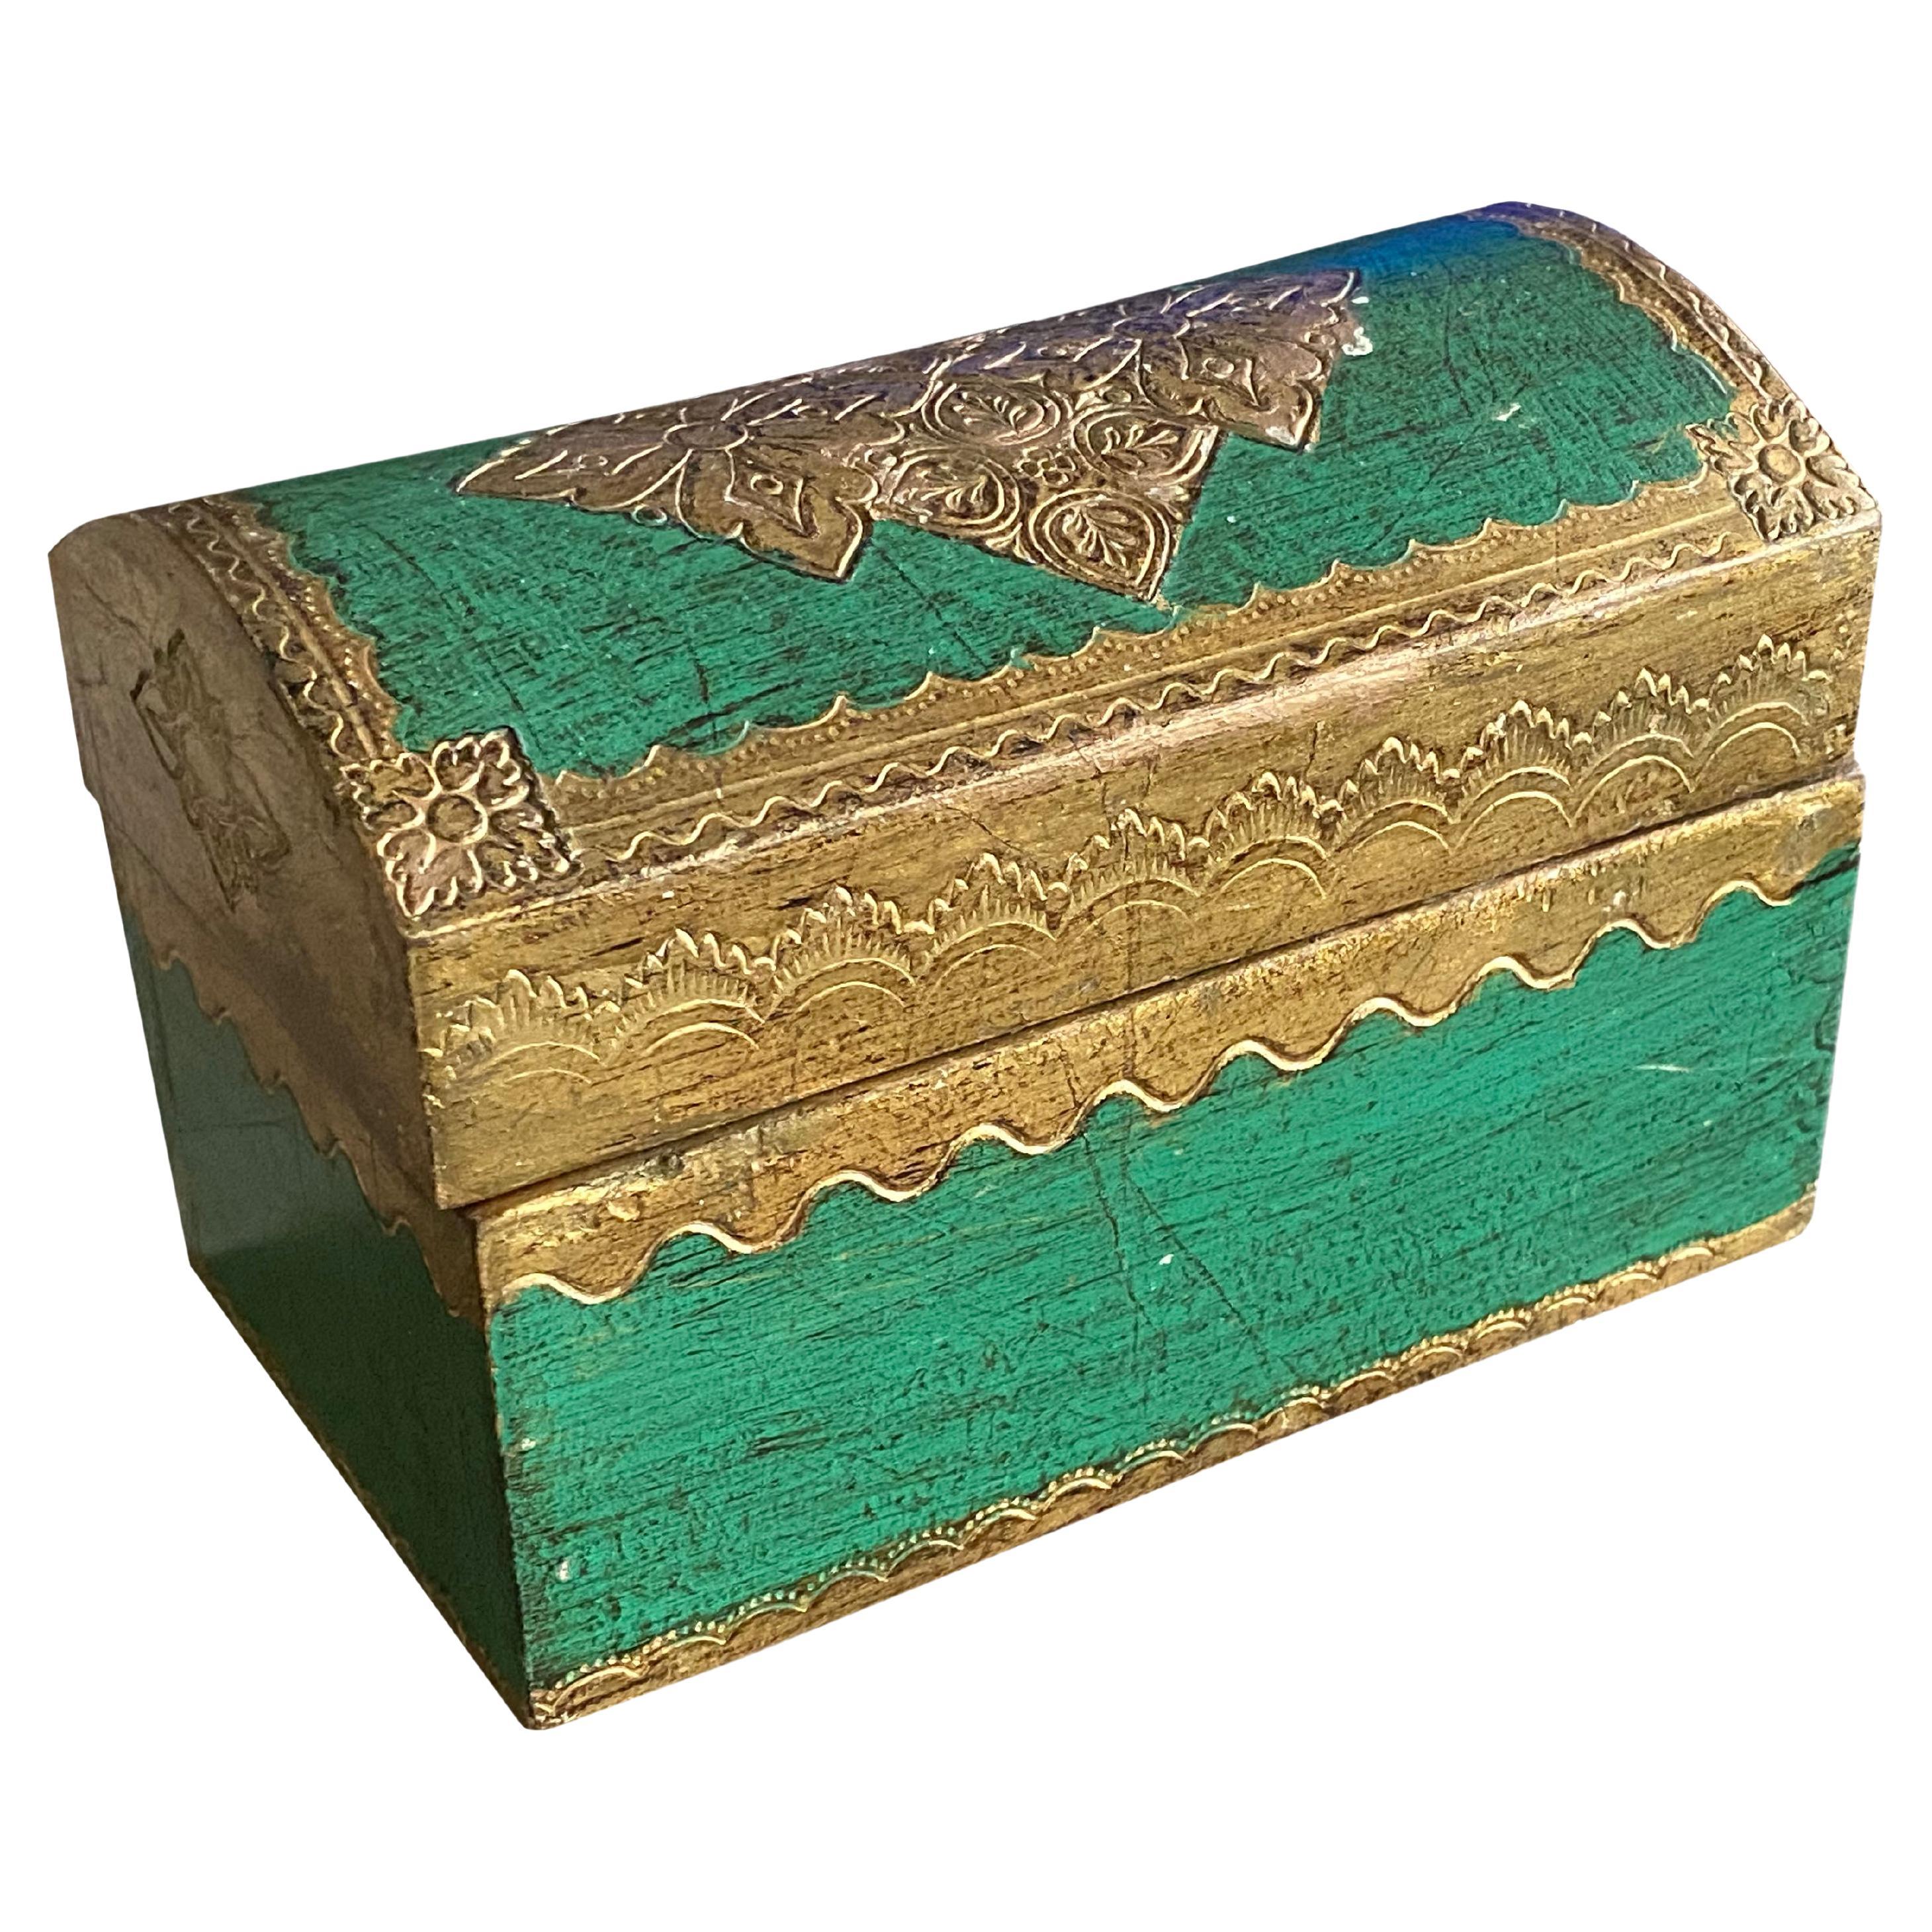 talian Florentine Domed Top Box For Sale